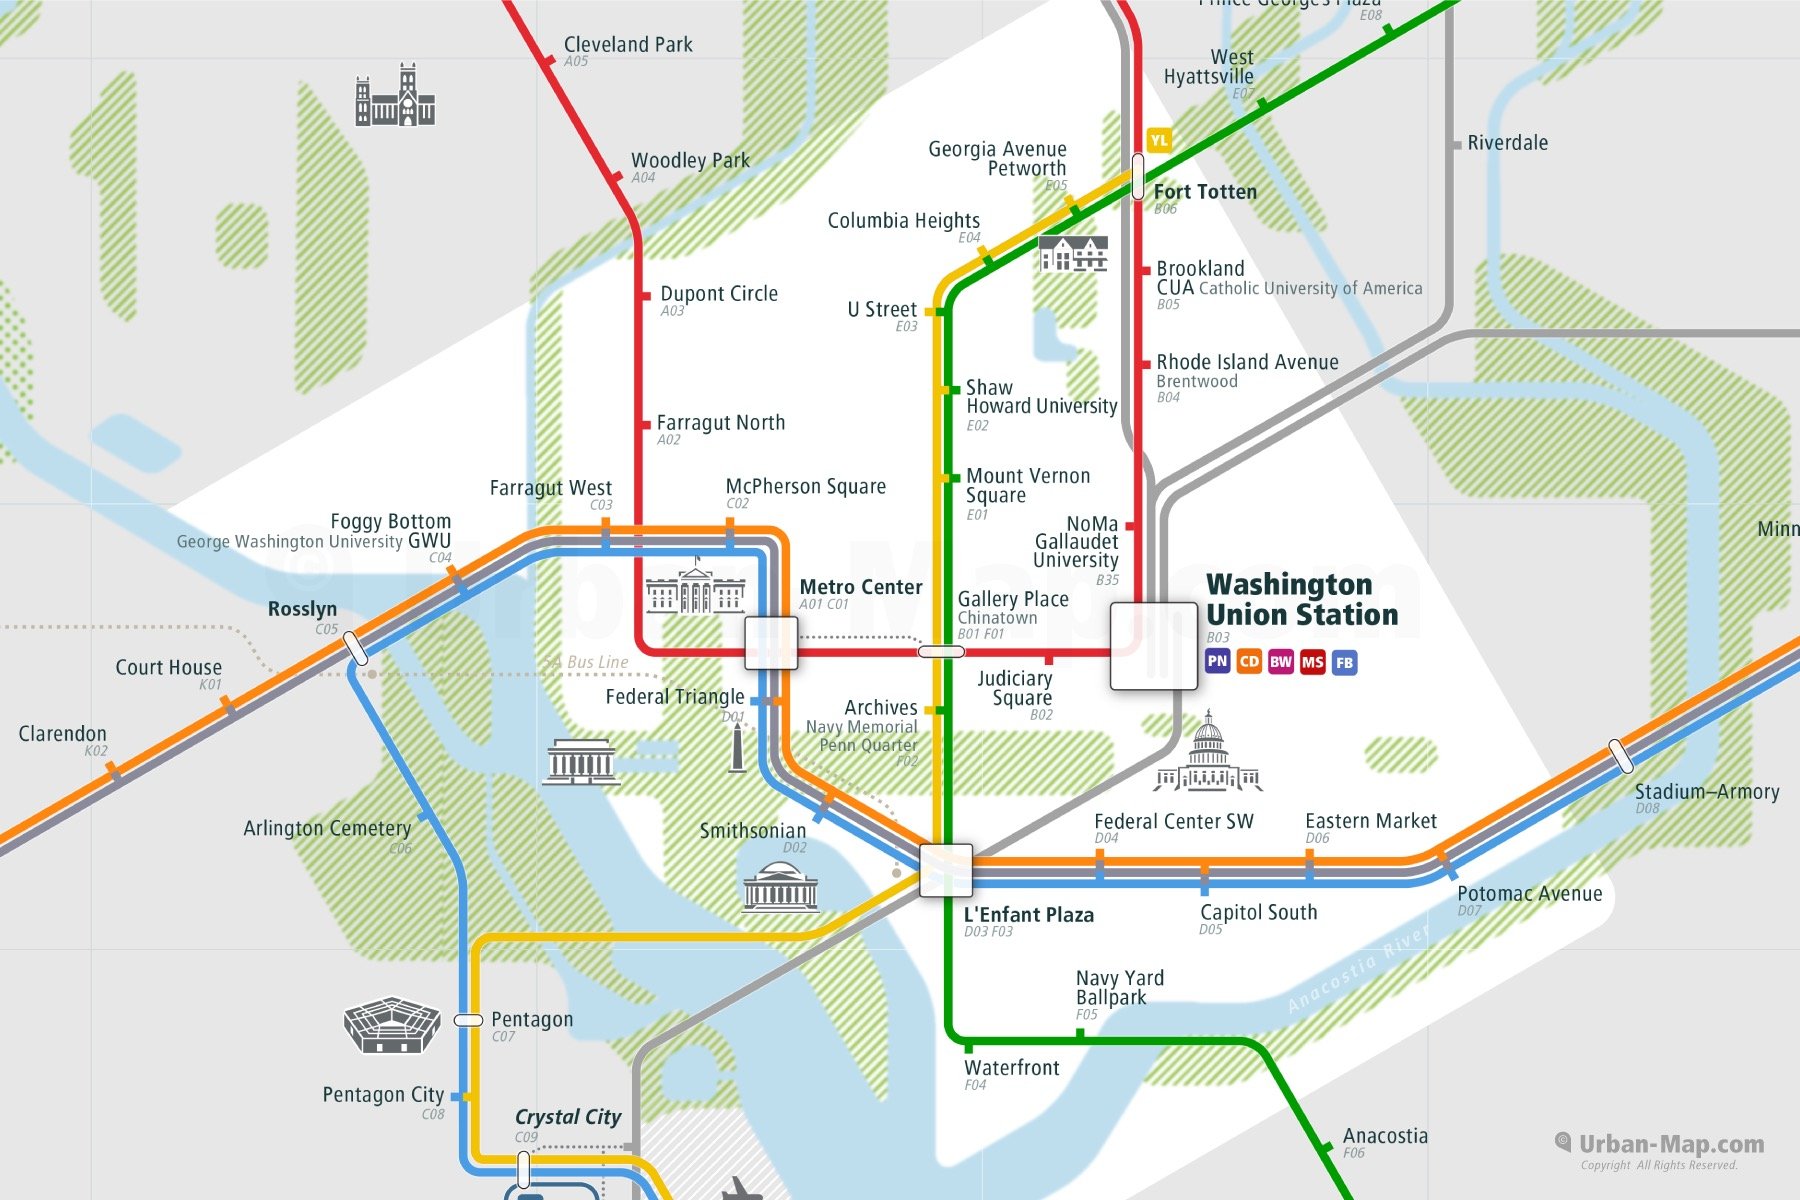 Washington City Rail Map shows the train and public transportation routes of Metro, Commuter Train - Close-Up